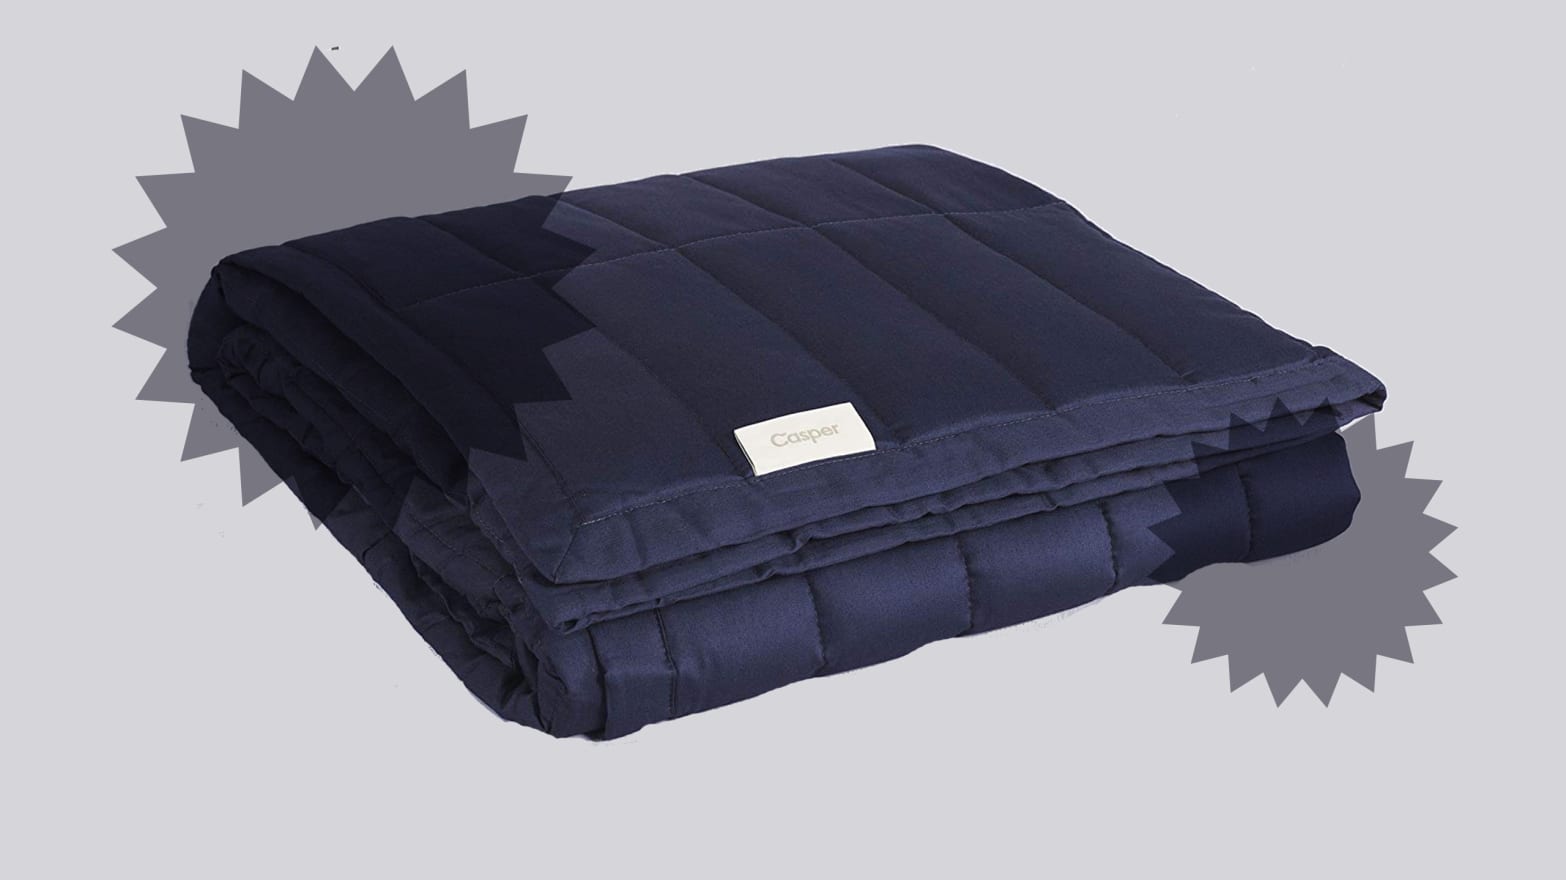 Casper Weighted Blanket Review